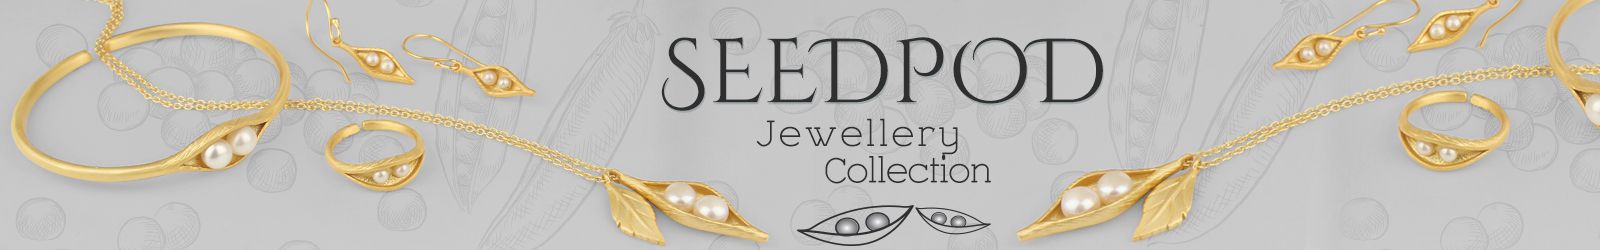 Wholesale Textured Seedpod Silver Jewelry Manufacturer in Jaipur